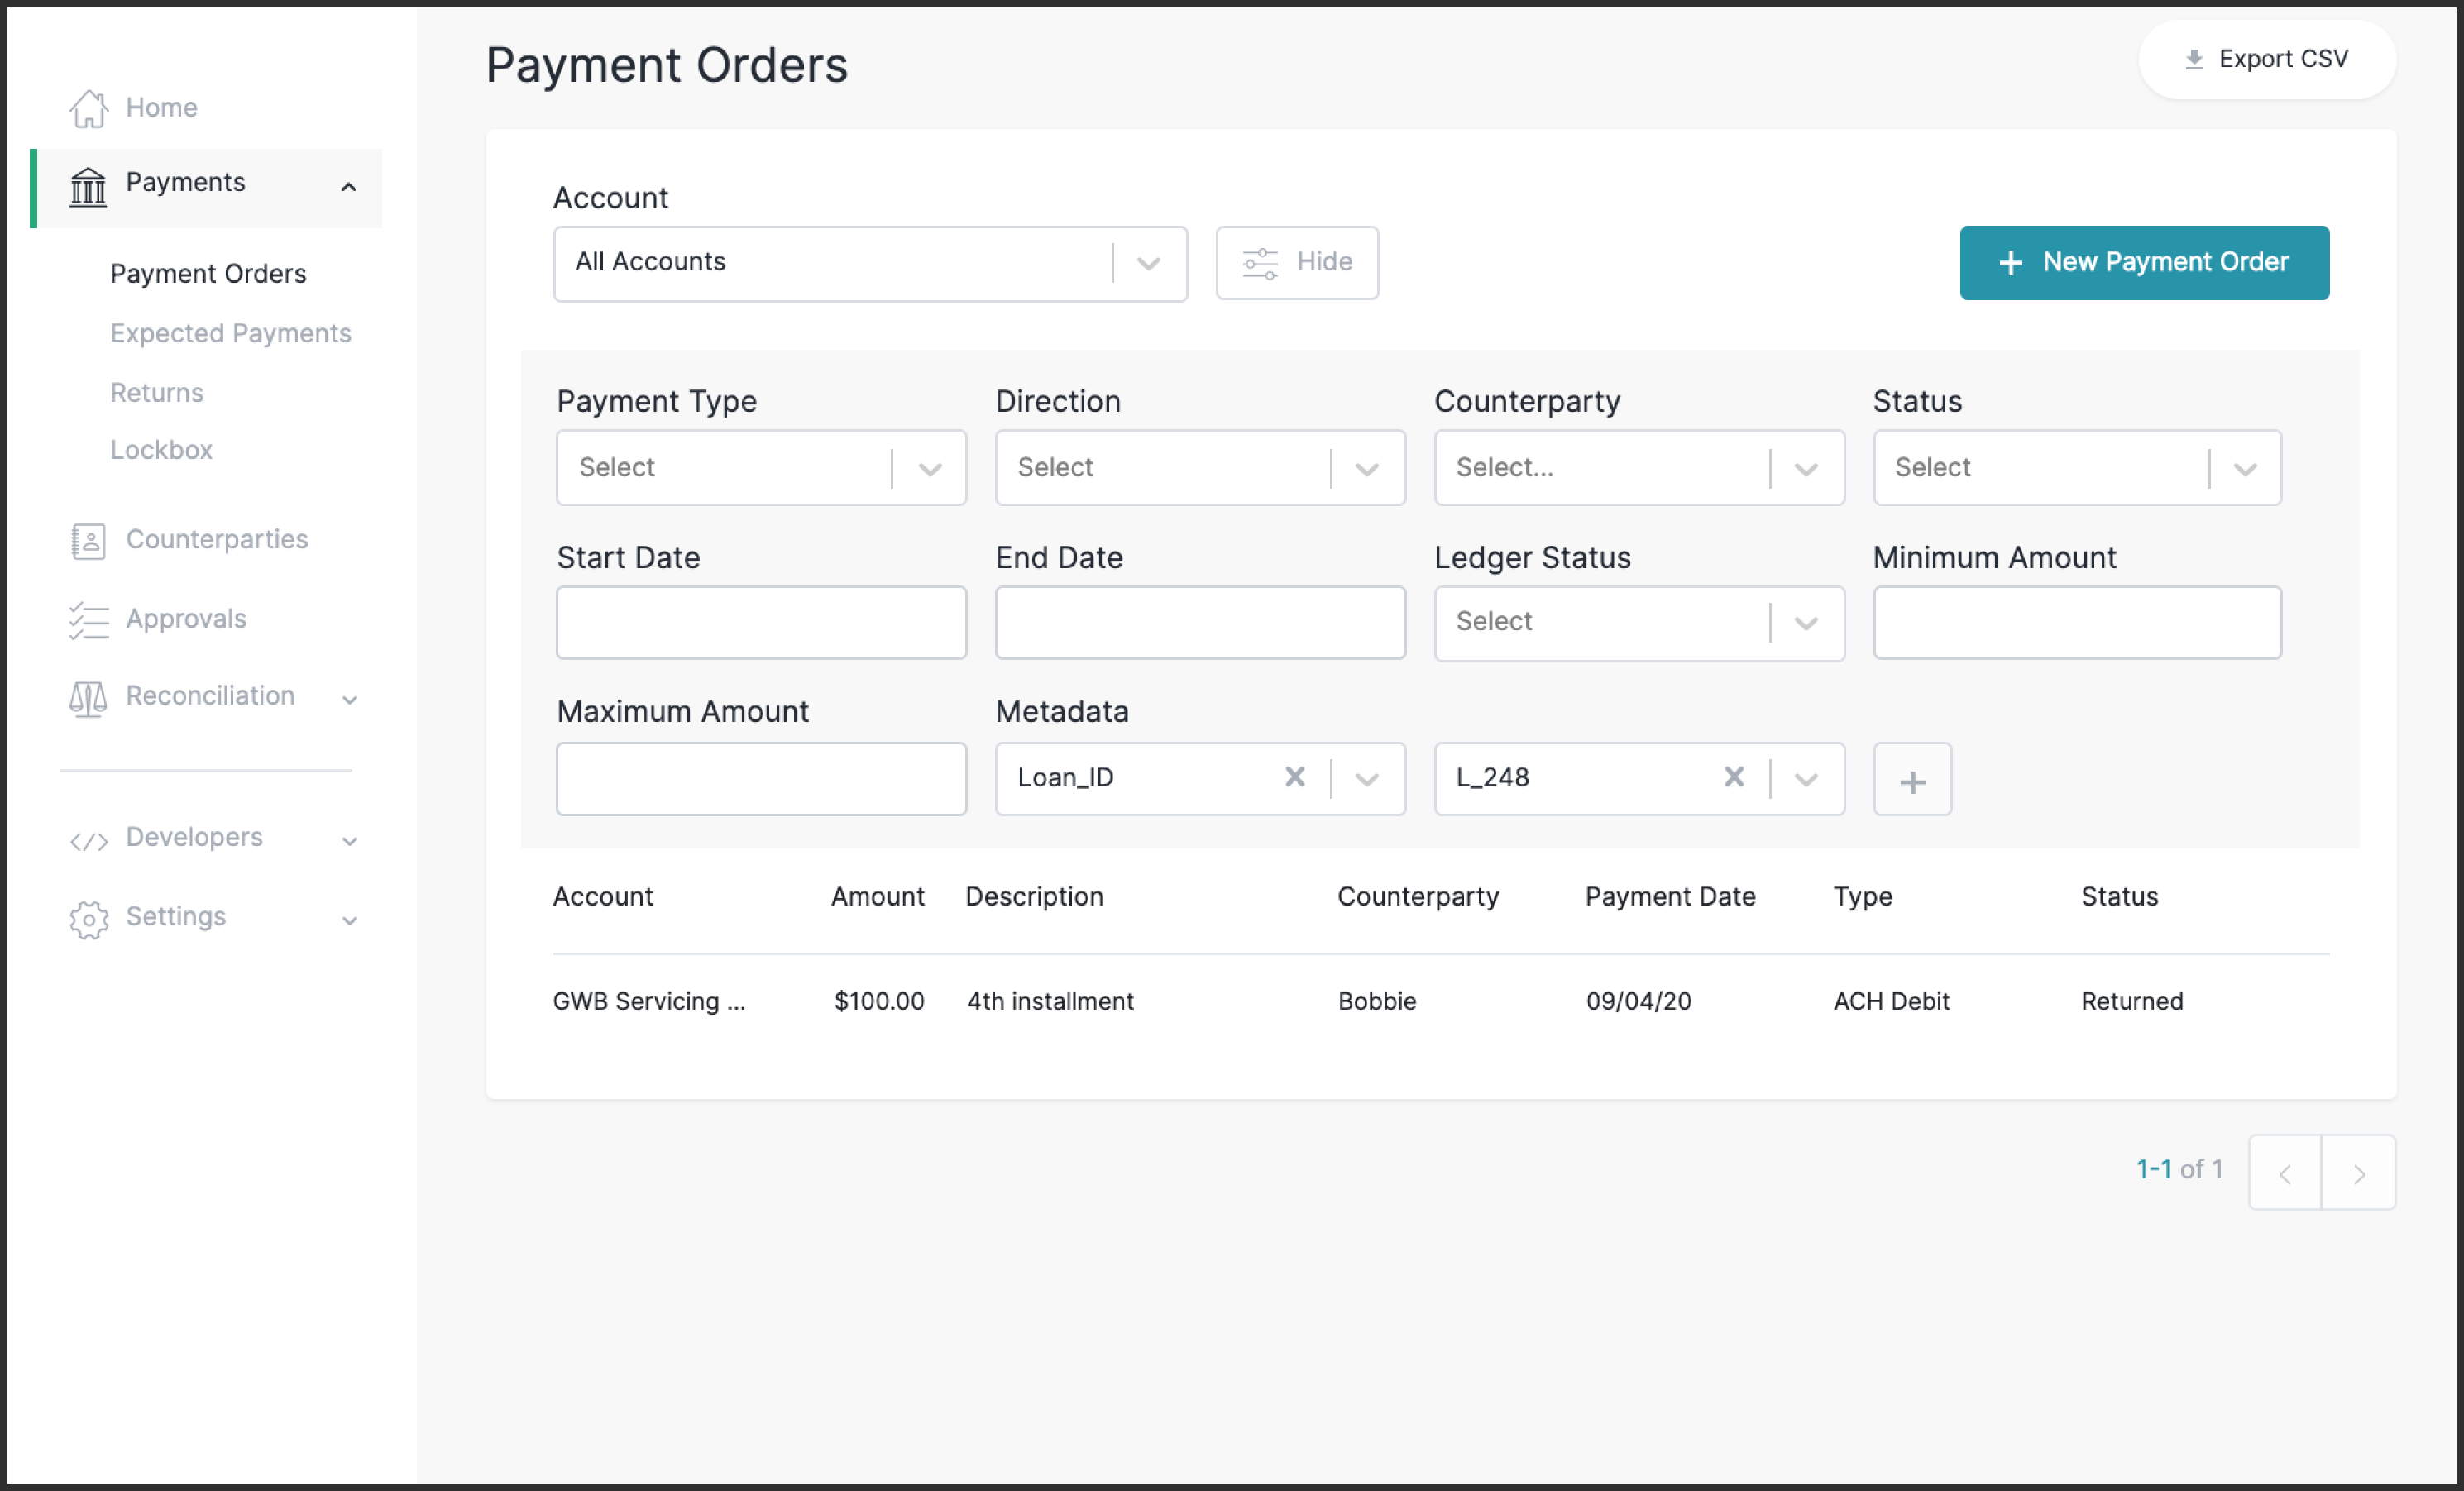 Modern Treasury’s New Payment Order interface